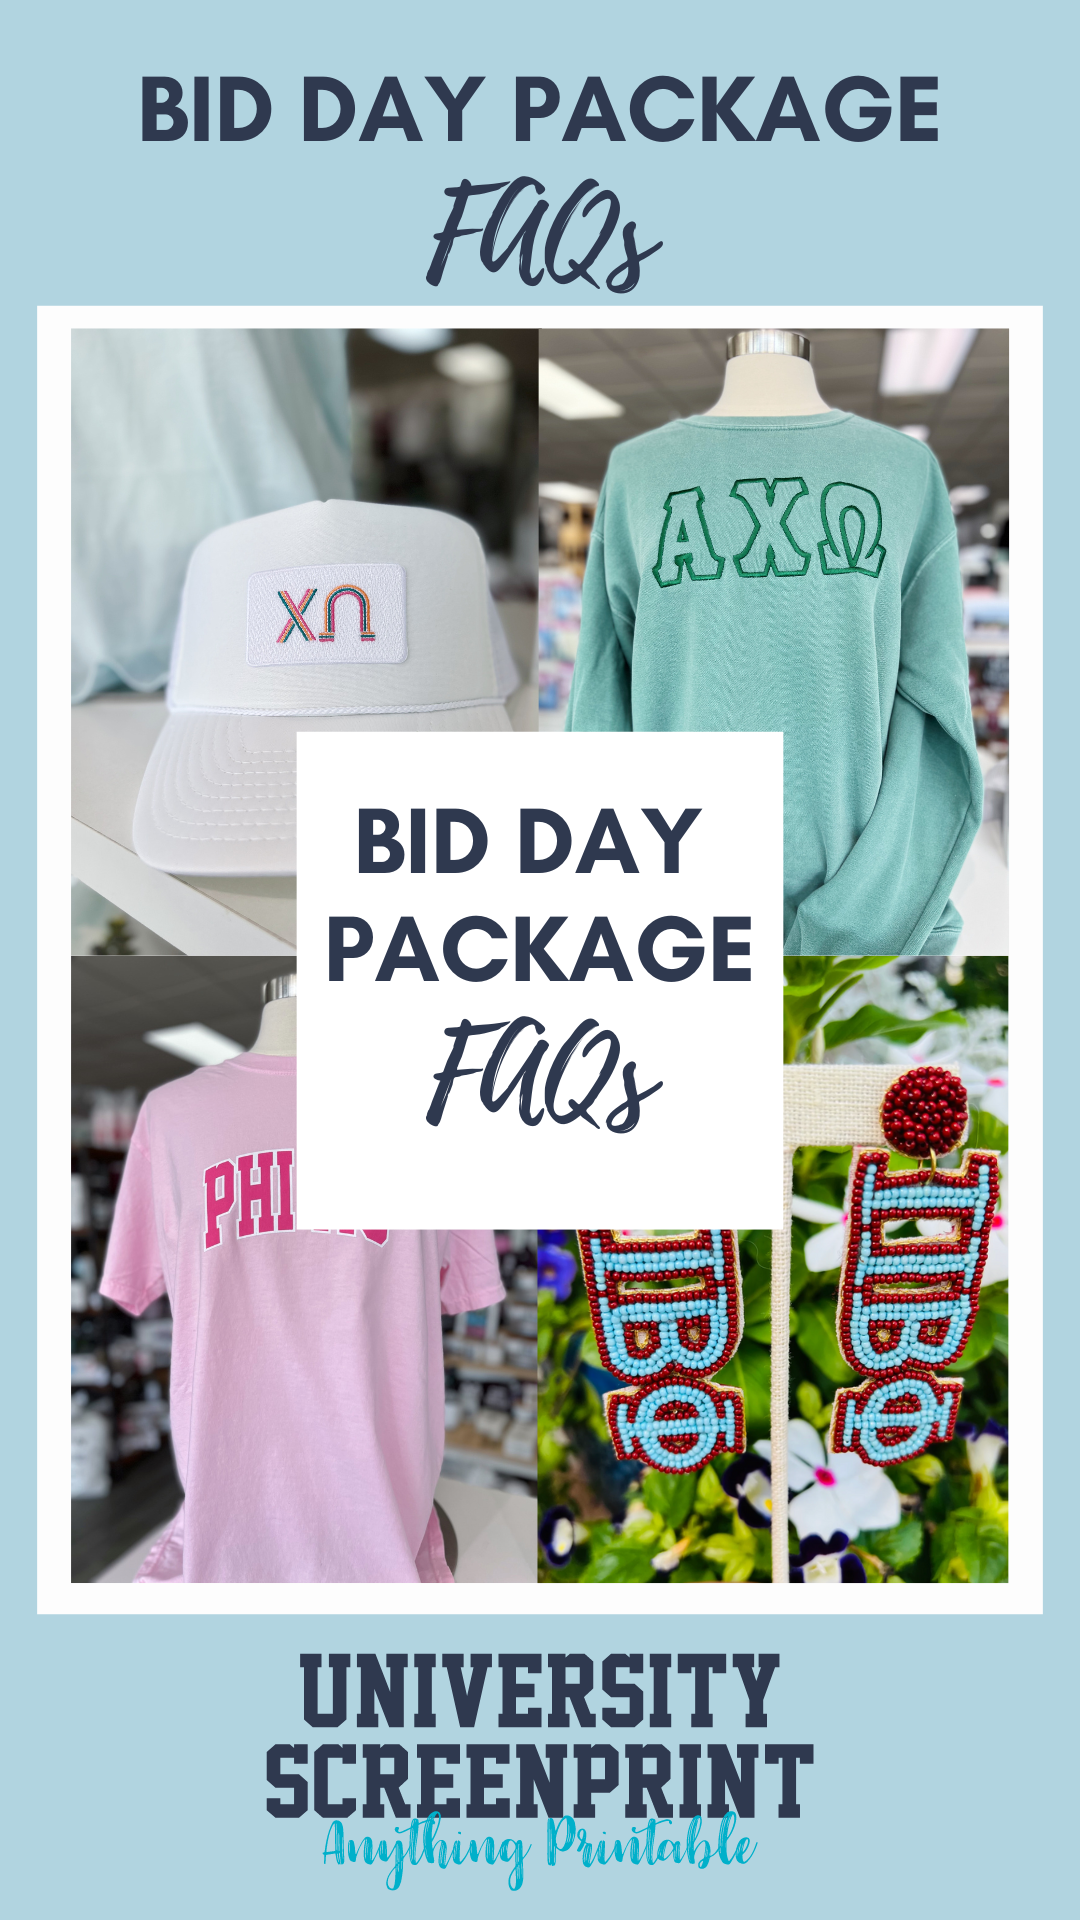 Bid Day Package Frequently Asked Questions